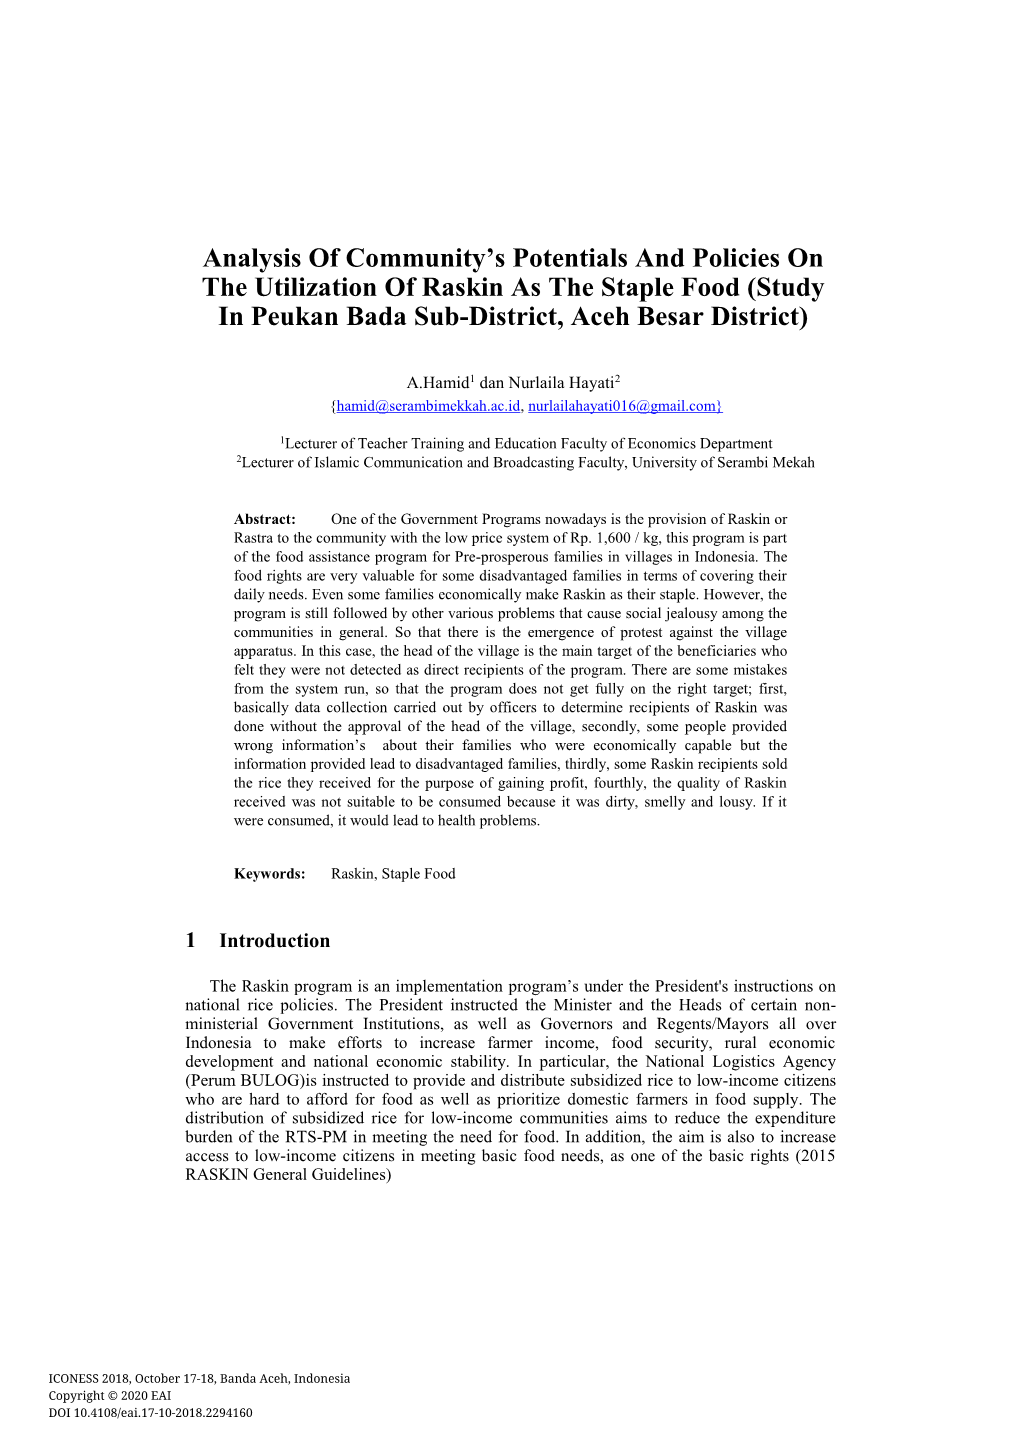 Analysis of Community's Potentials and Policies on the Utilization Of